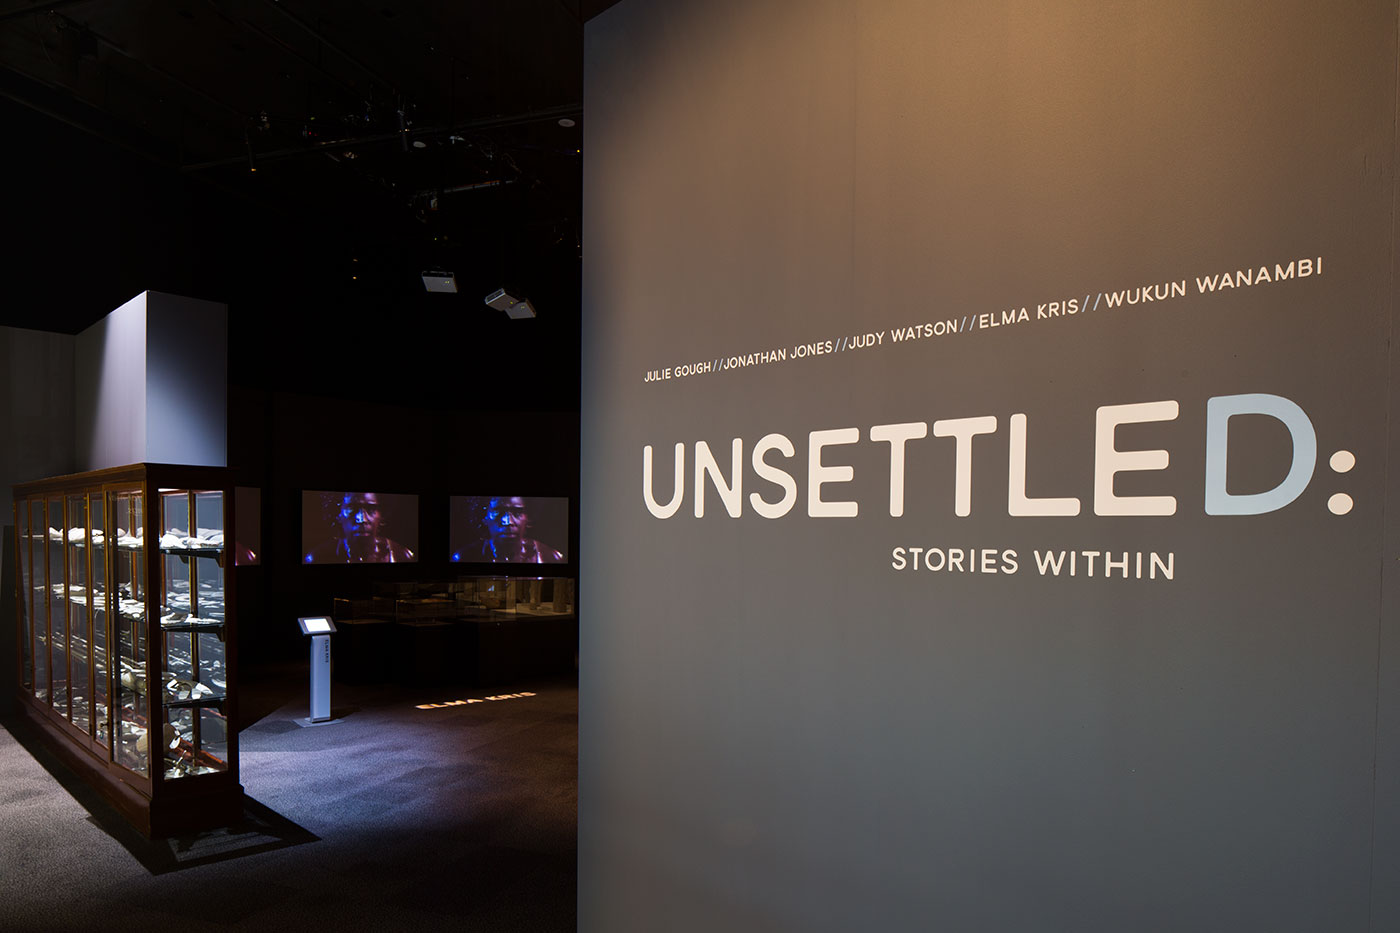 Unsettled: Stories within.